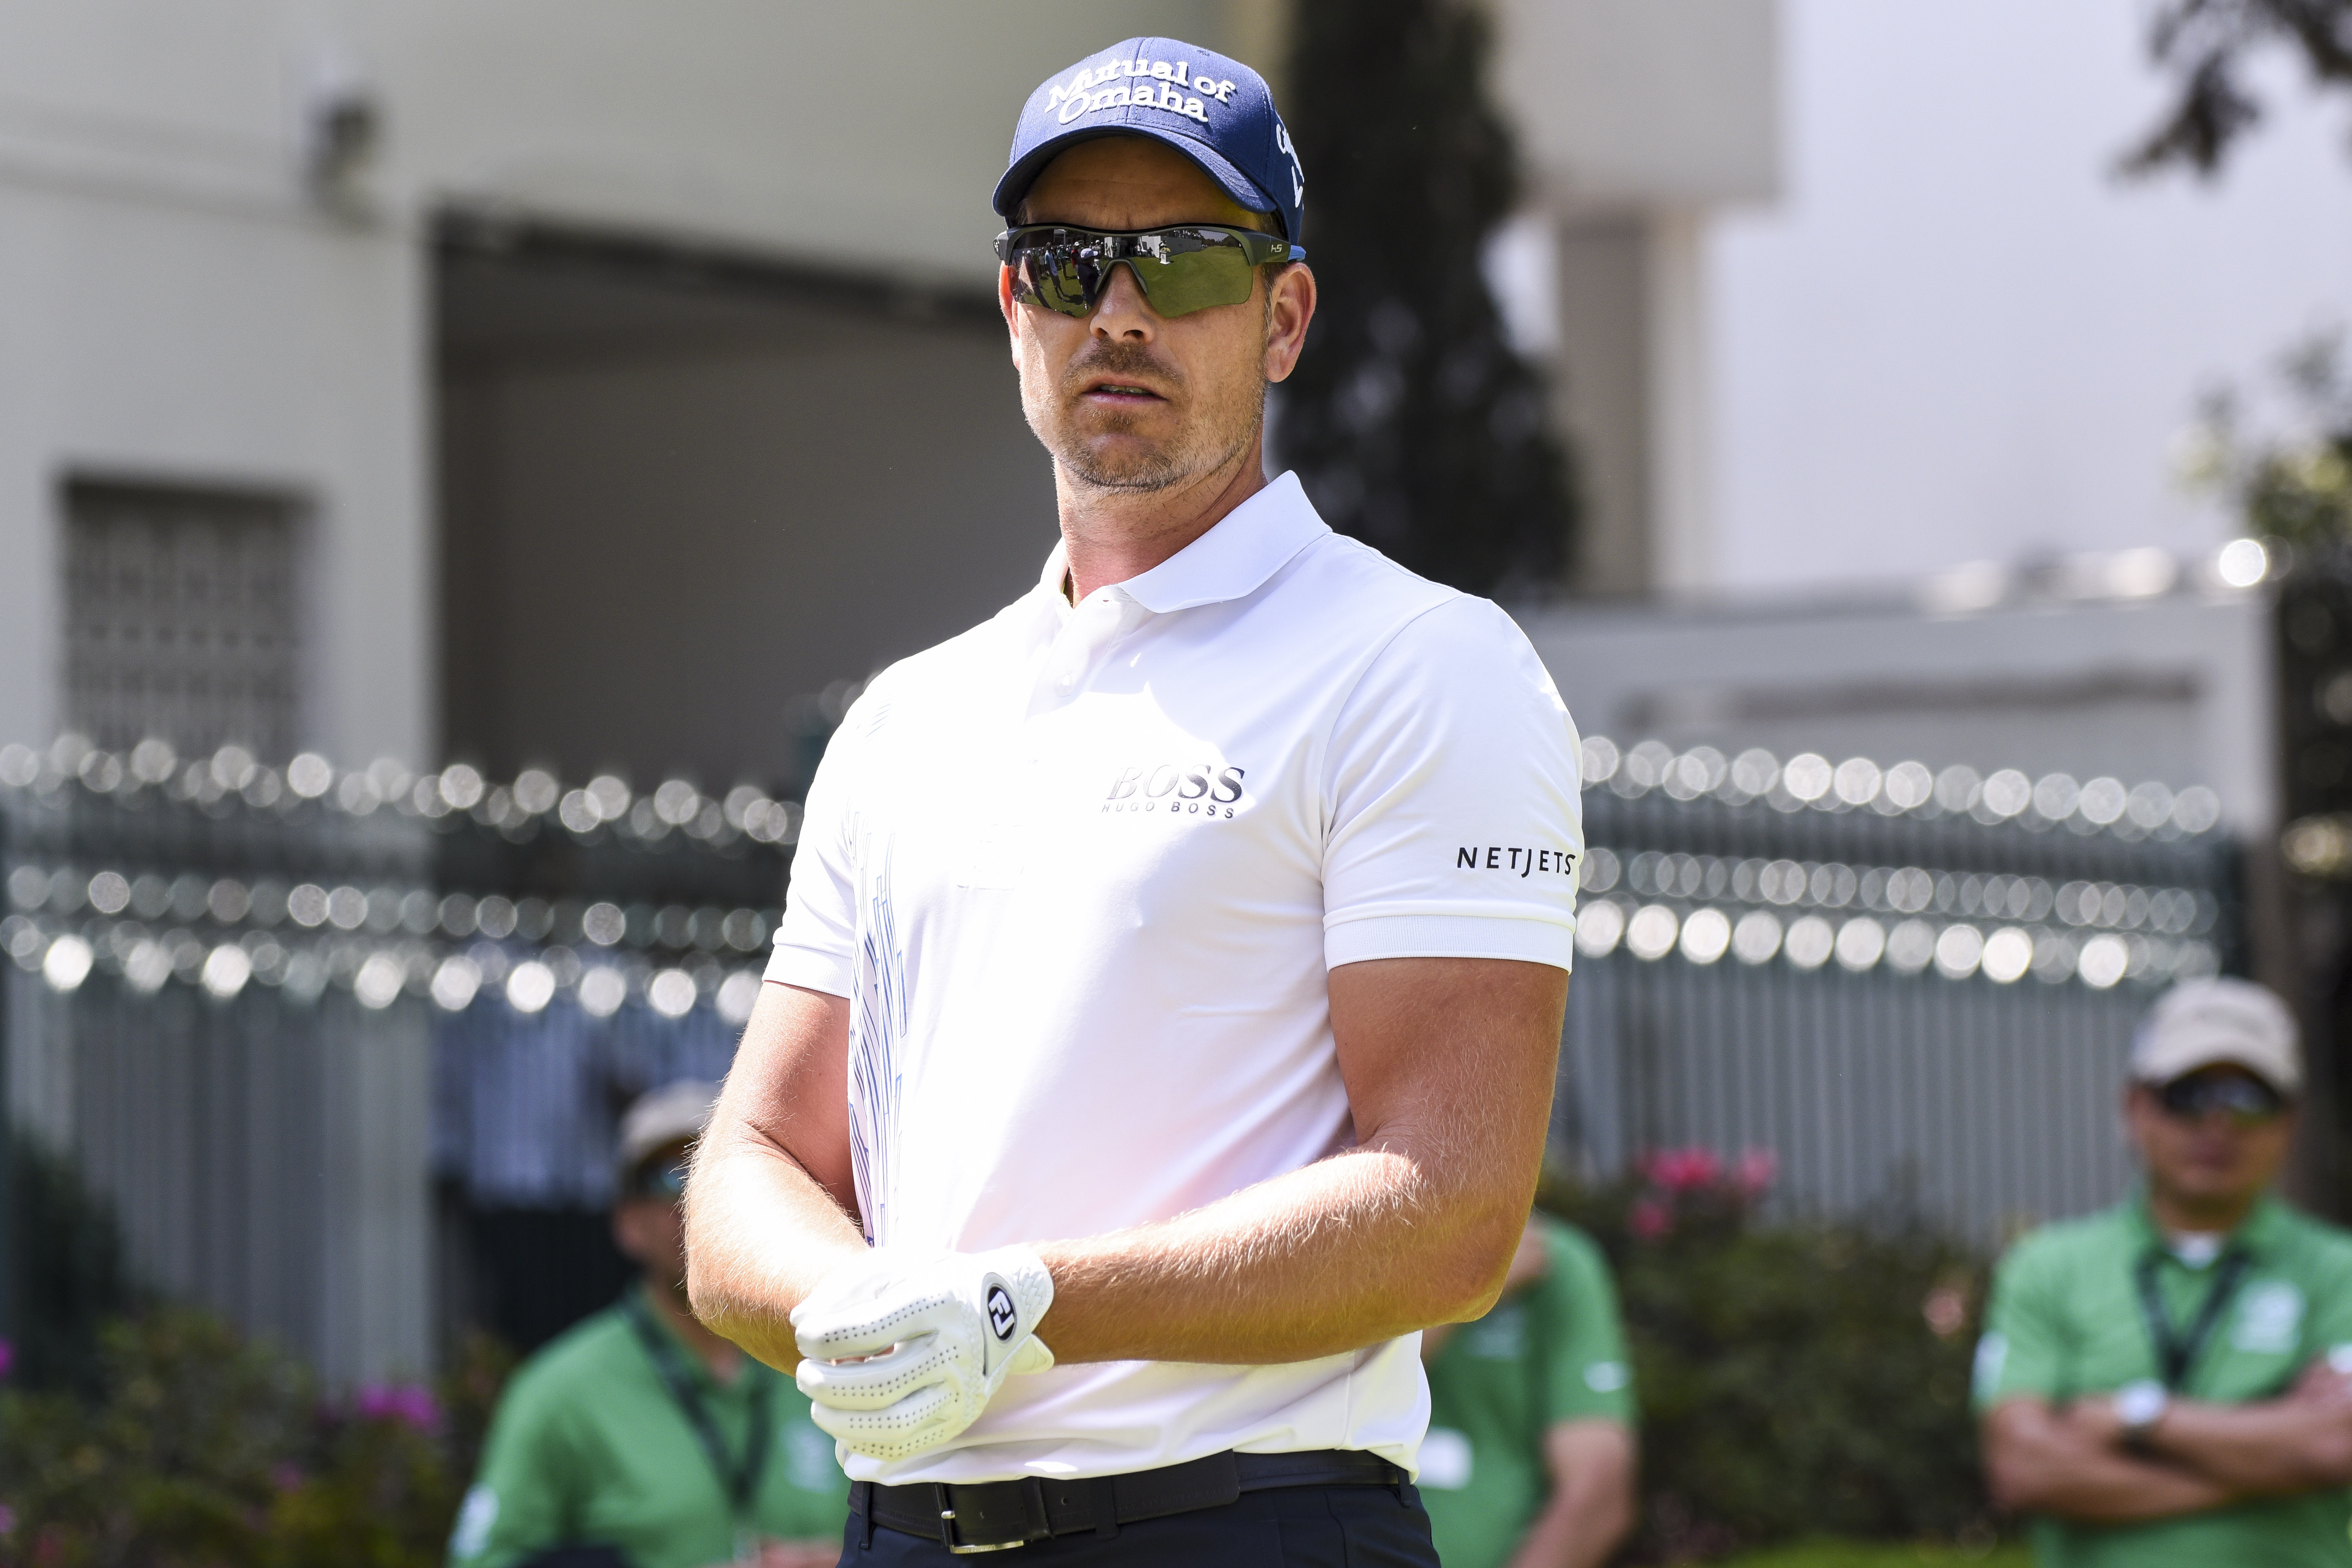 MEXICO CITY, MEXICO - MARCH 02: Henrik Stenson of Sweden puts on his glove before teeing off on the first hole during the first round of the World Golf Championships-Mexico Championship at Club de Golf Chapultepec on March 2, 2017 in Mexico City, Mexico. (Photo by Keyur Khamar/PGA TOUR)